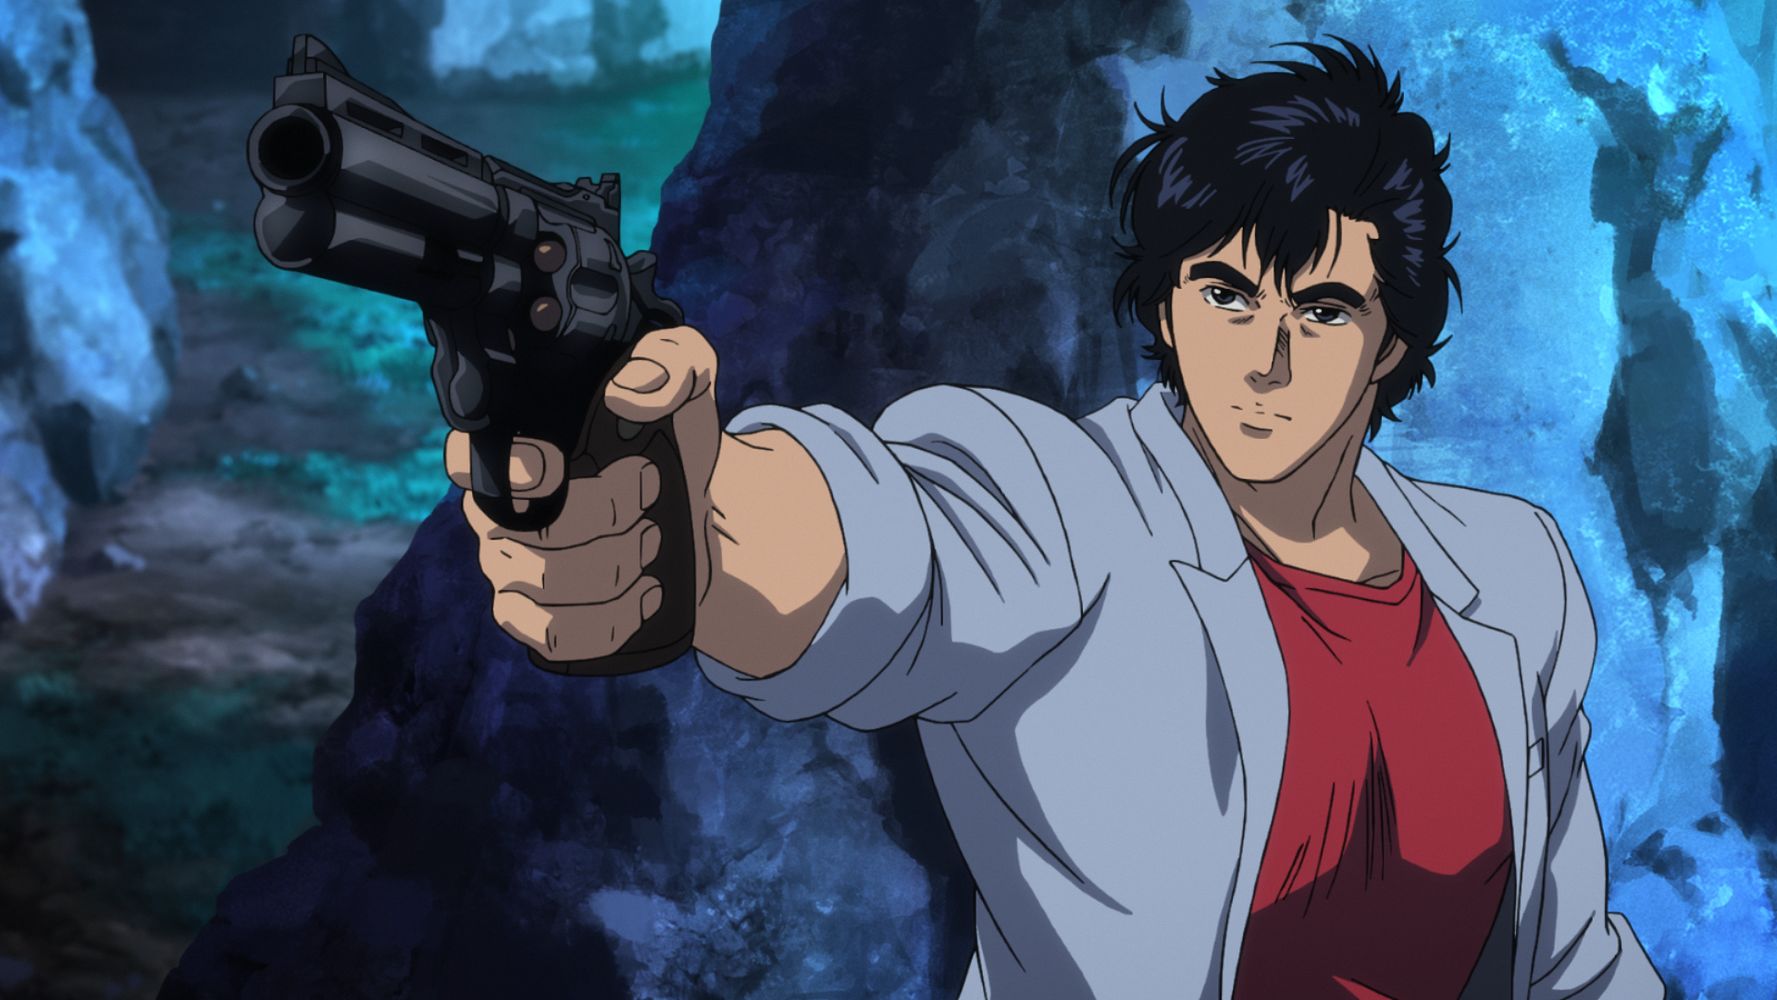 CITY HUNTER: PRIVATE EYES